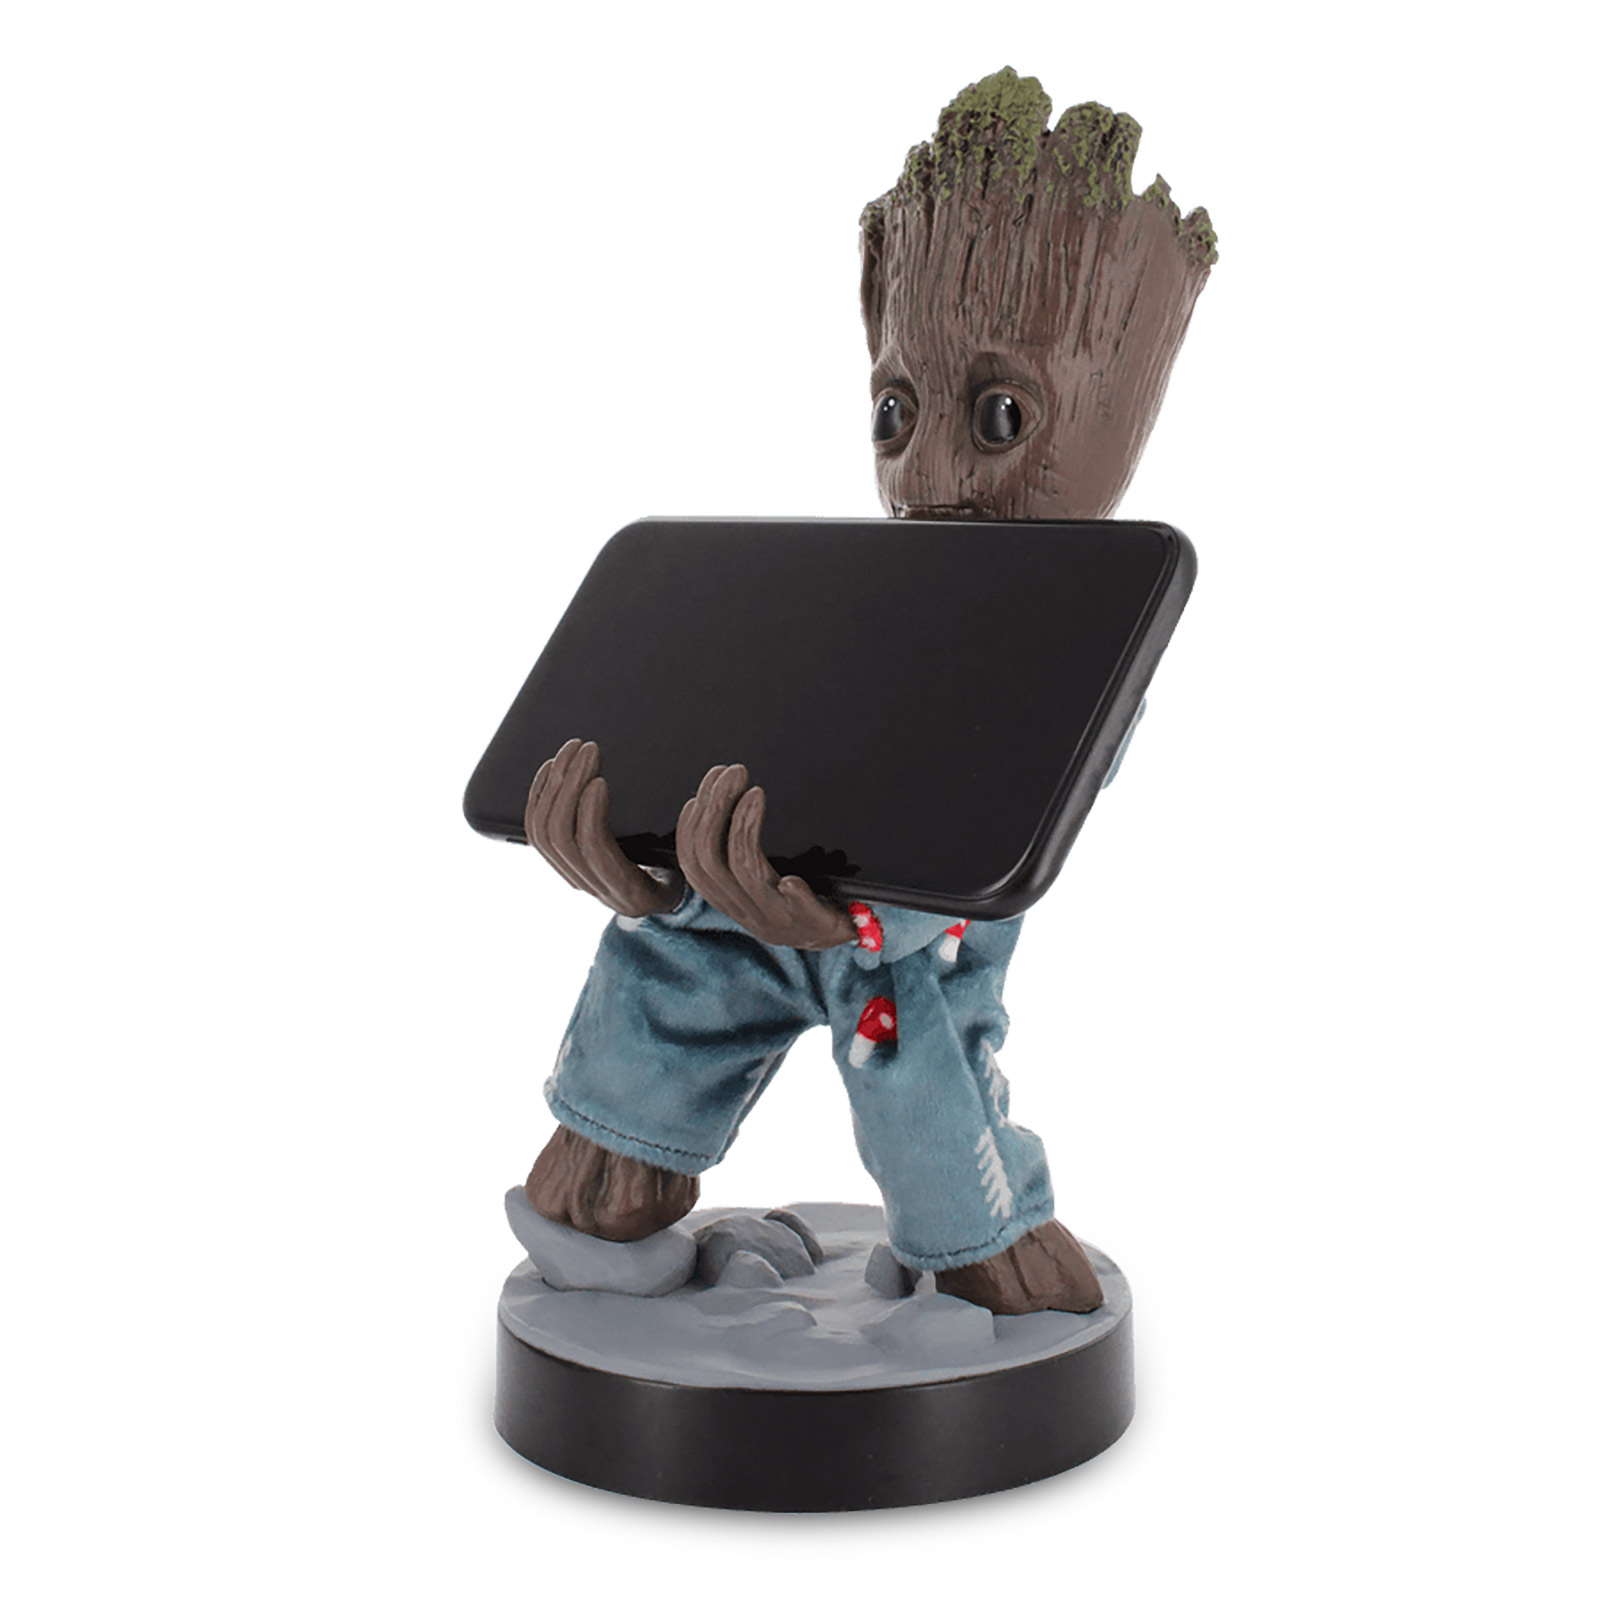 Guardians of the Galaxy - Pyjama Groot Cable Guy Figur